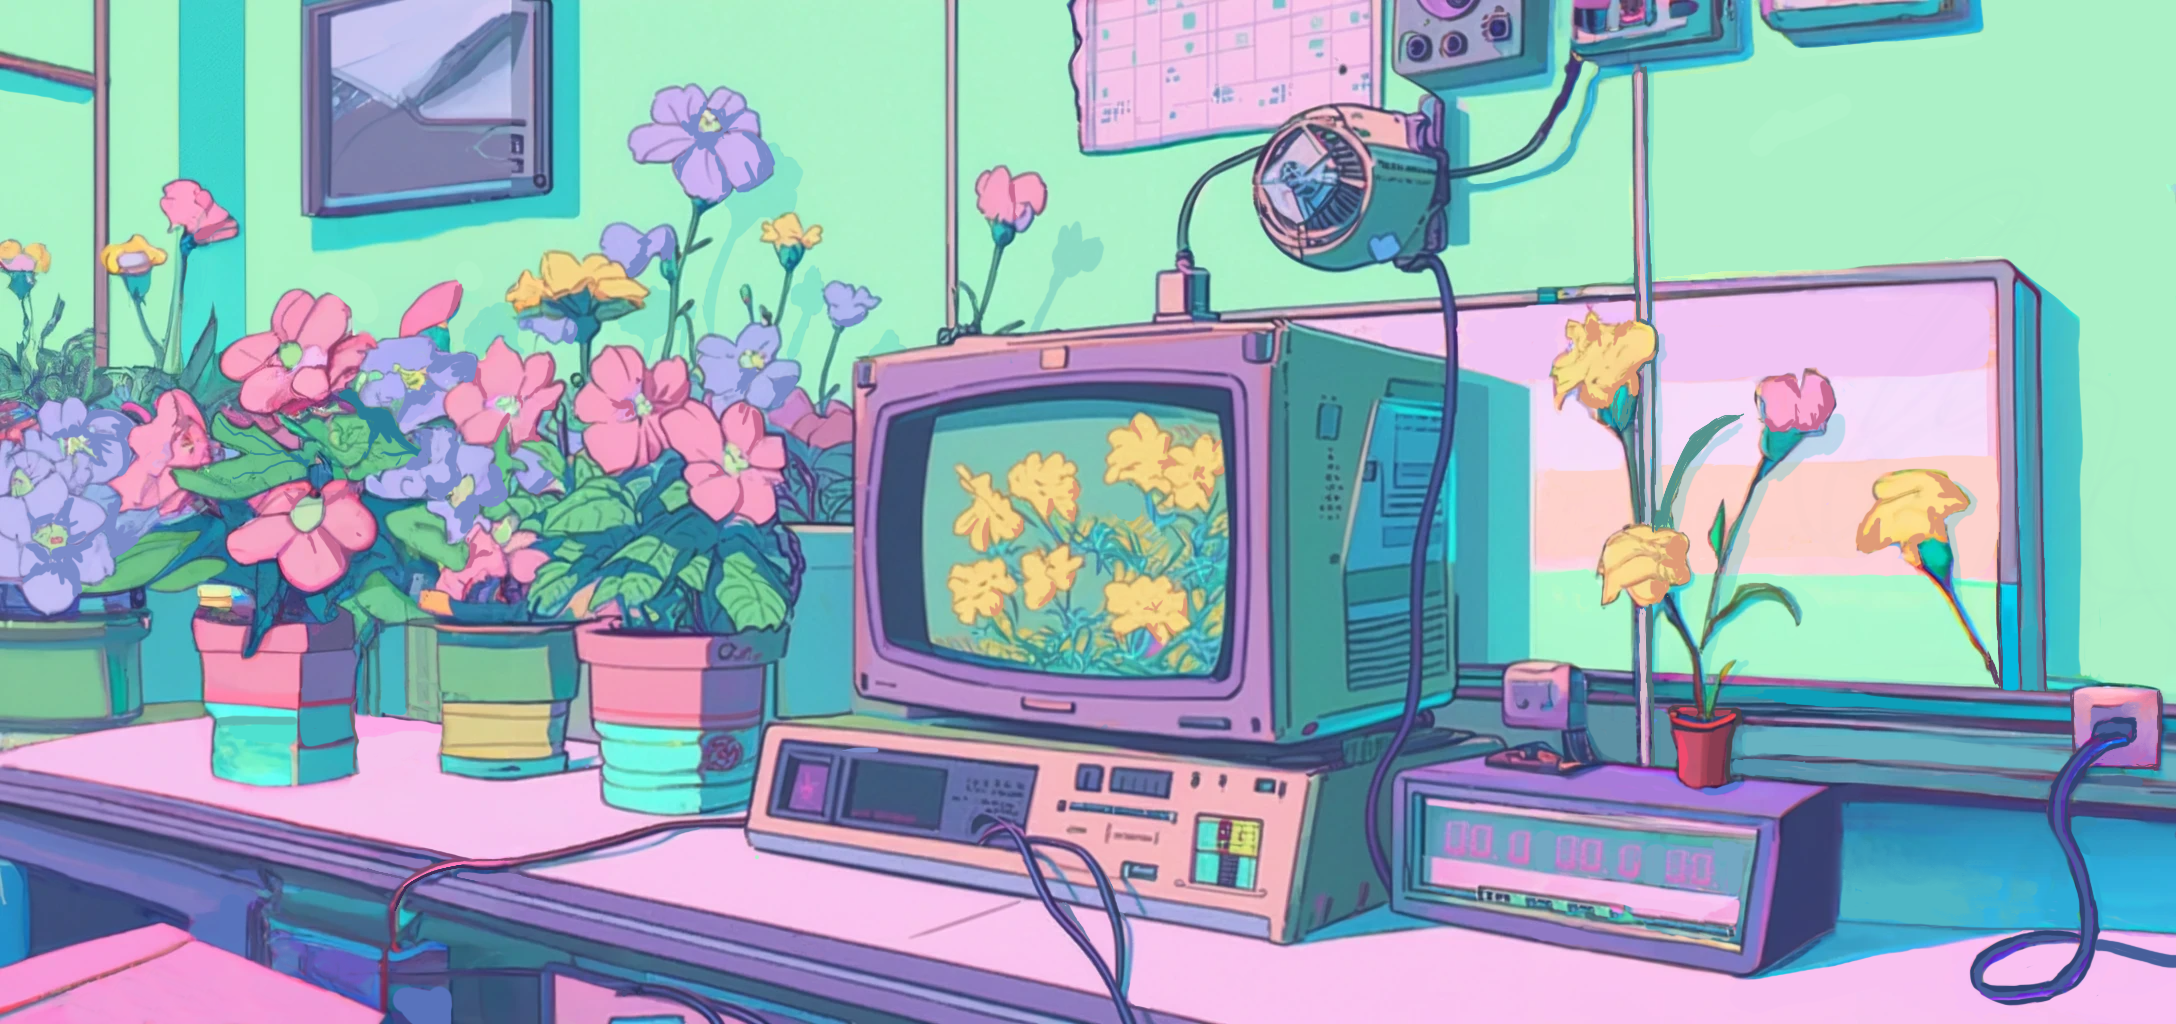 A monitor surrounded by flowers in a cel shaded illustration style.